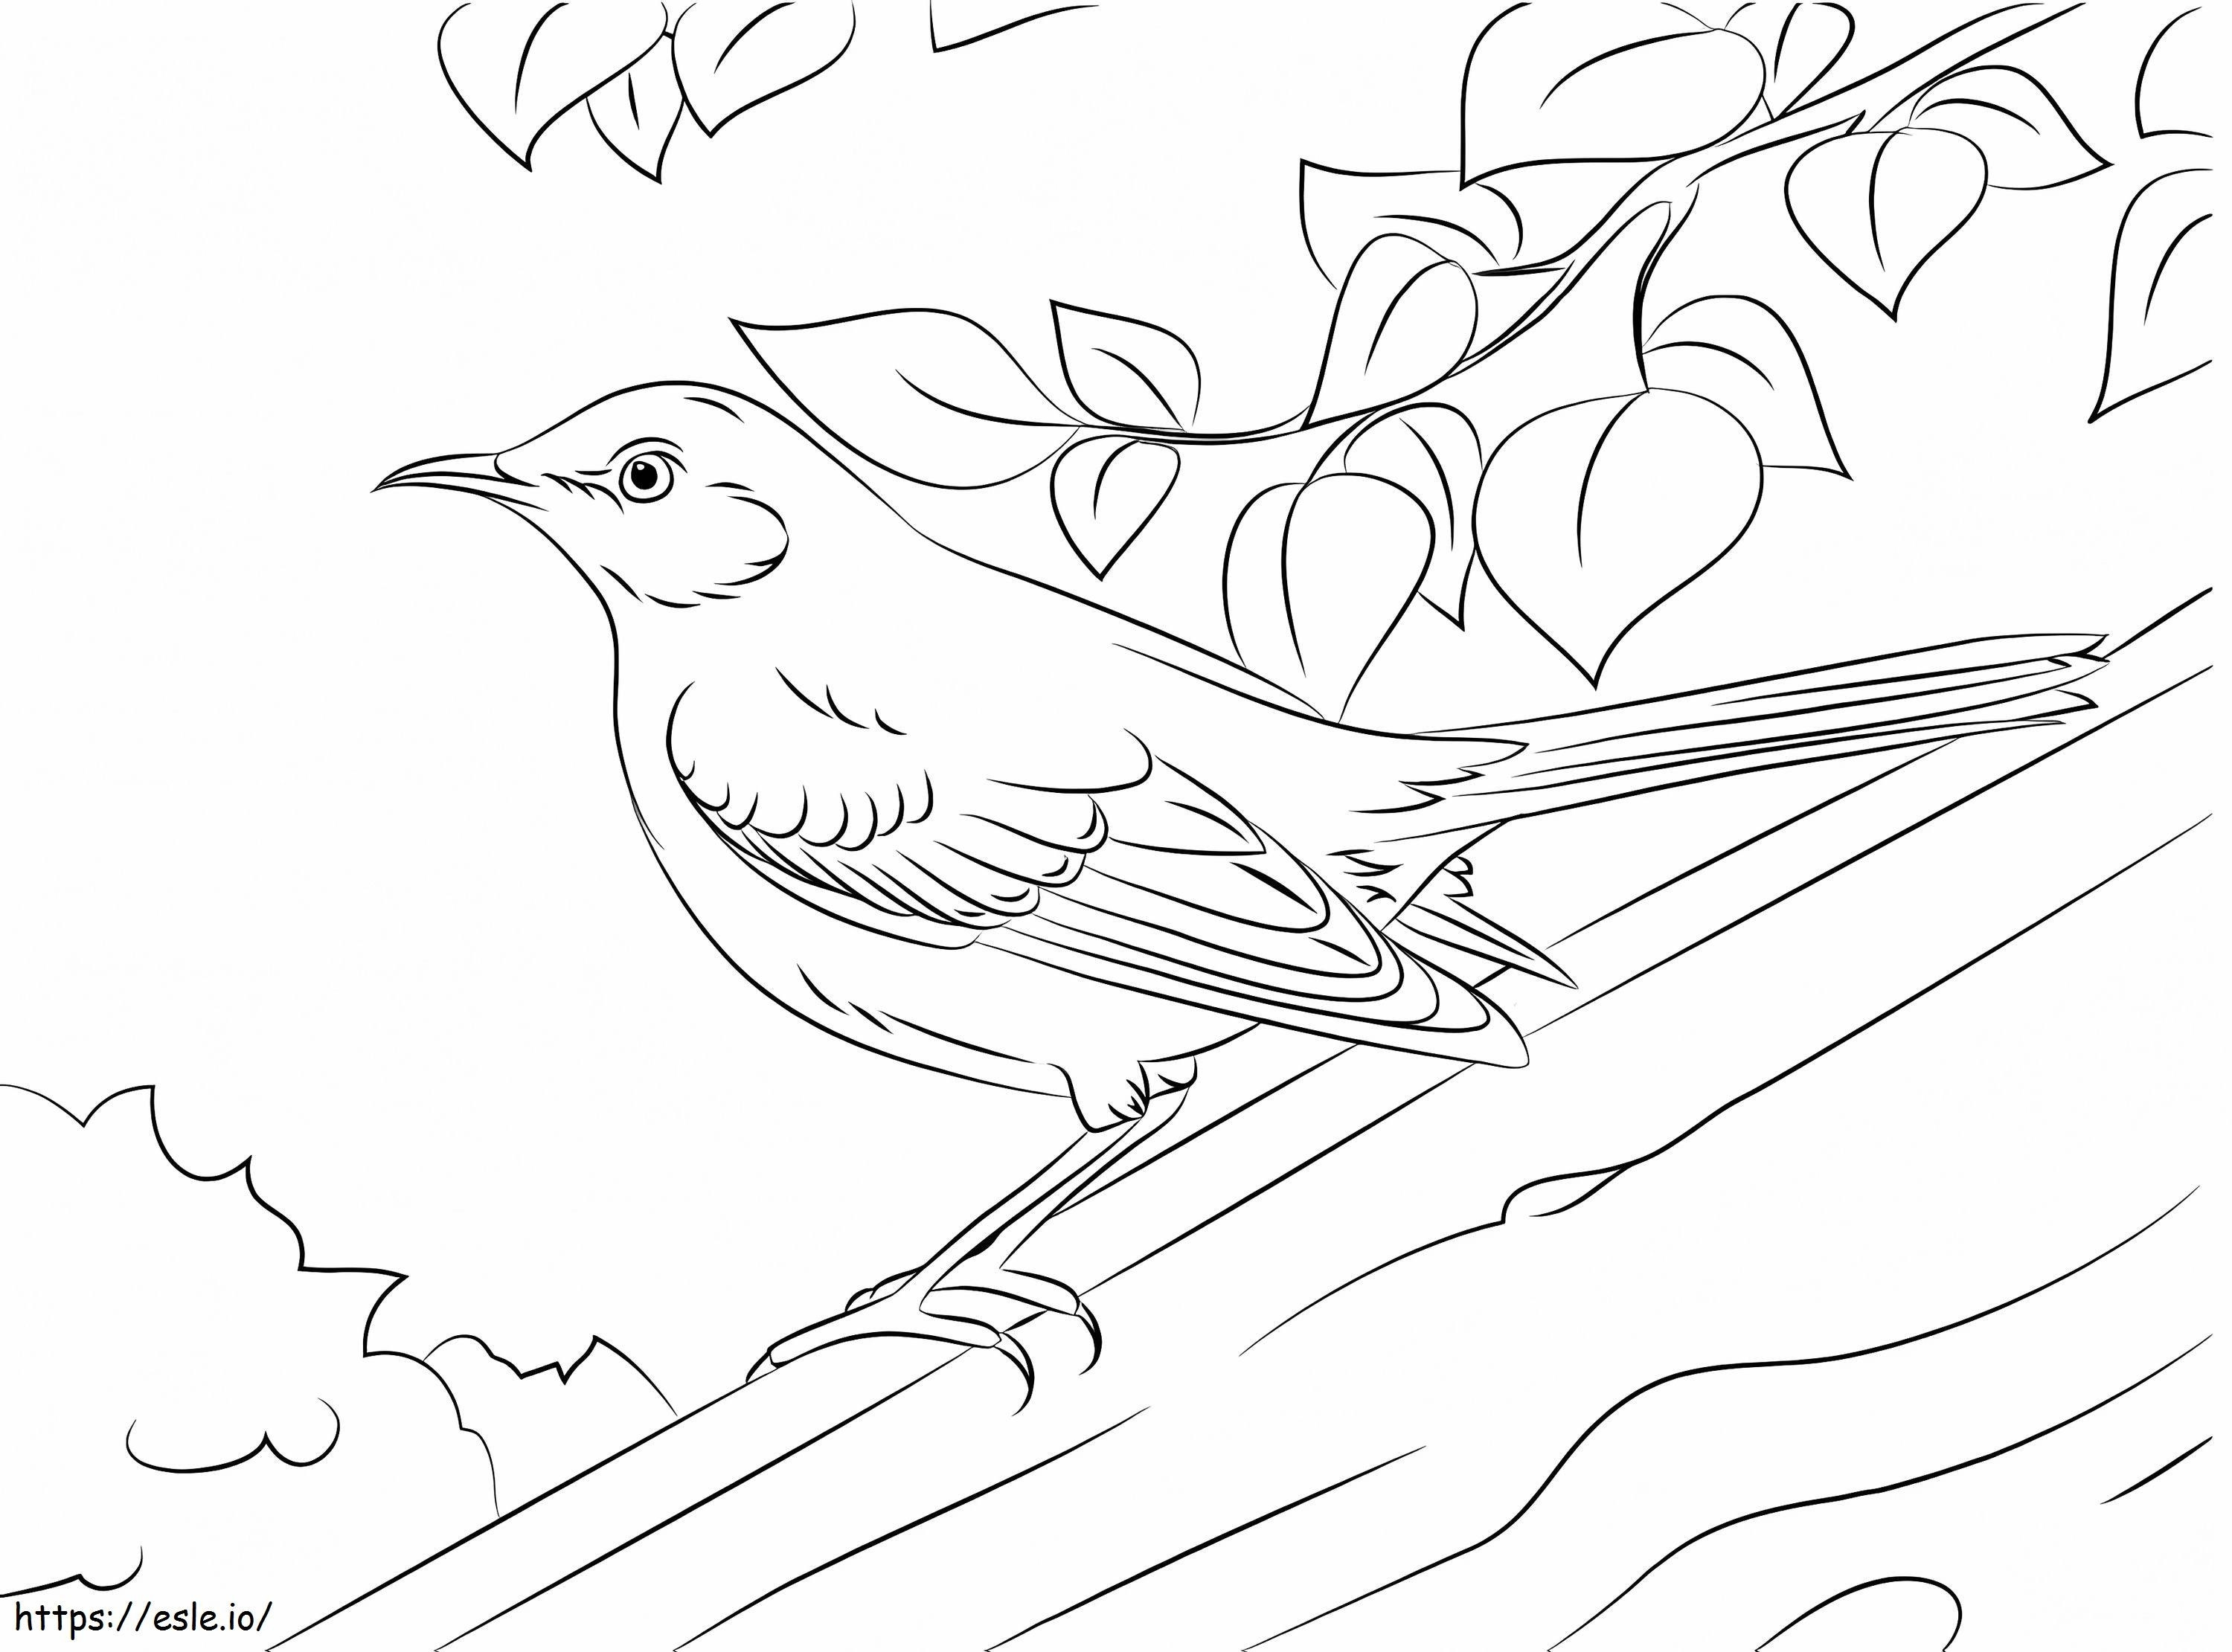 Nightingale On Tree Trunk coloring page